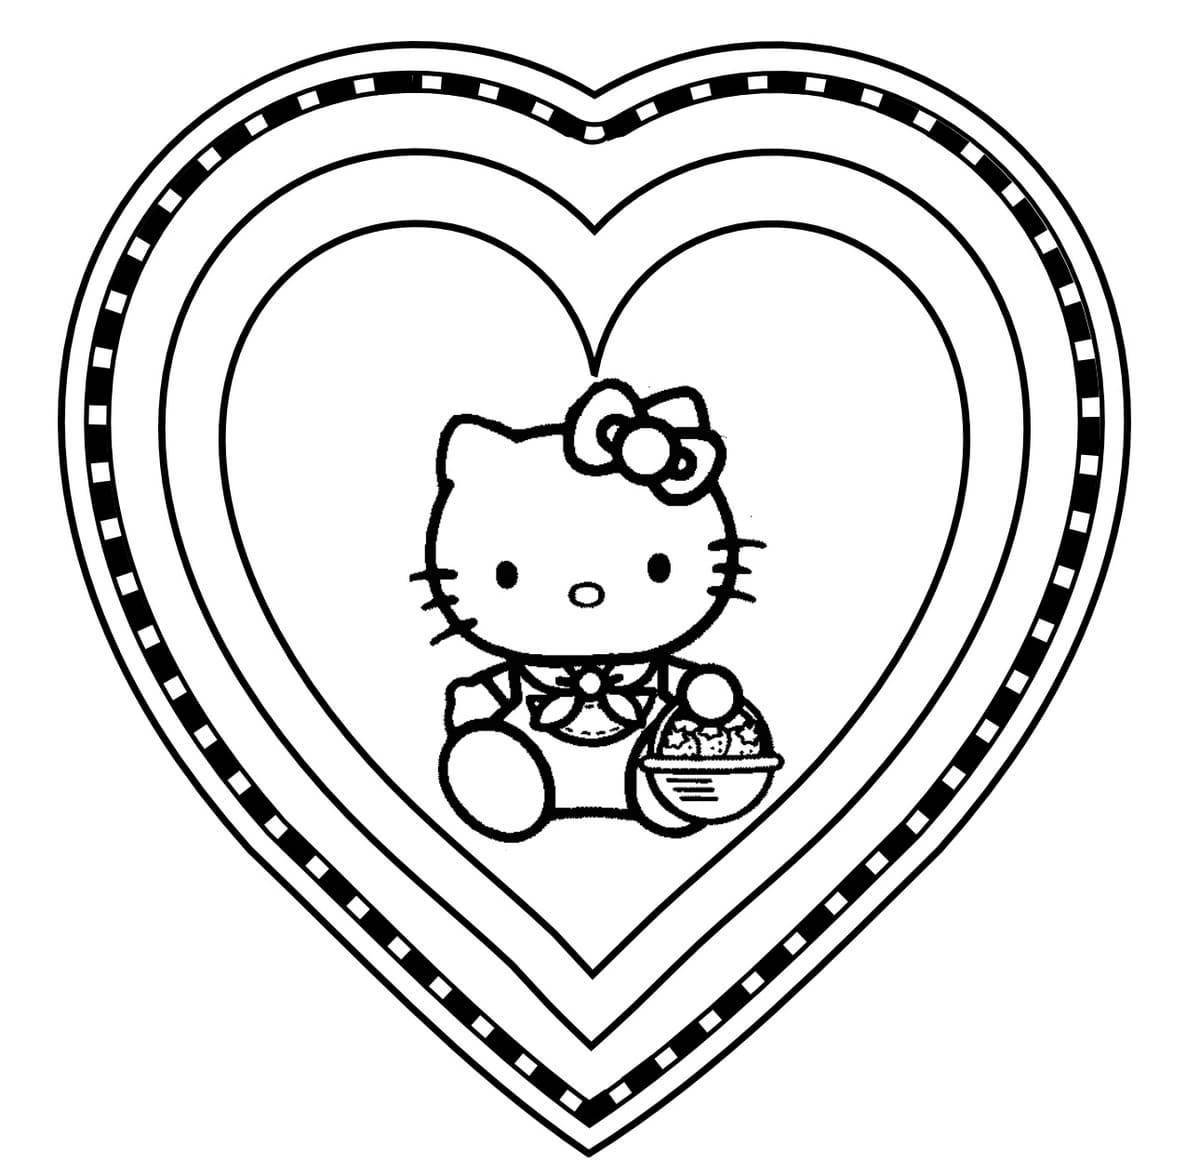 Playful valentine's coloring page